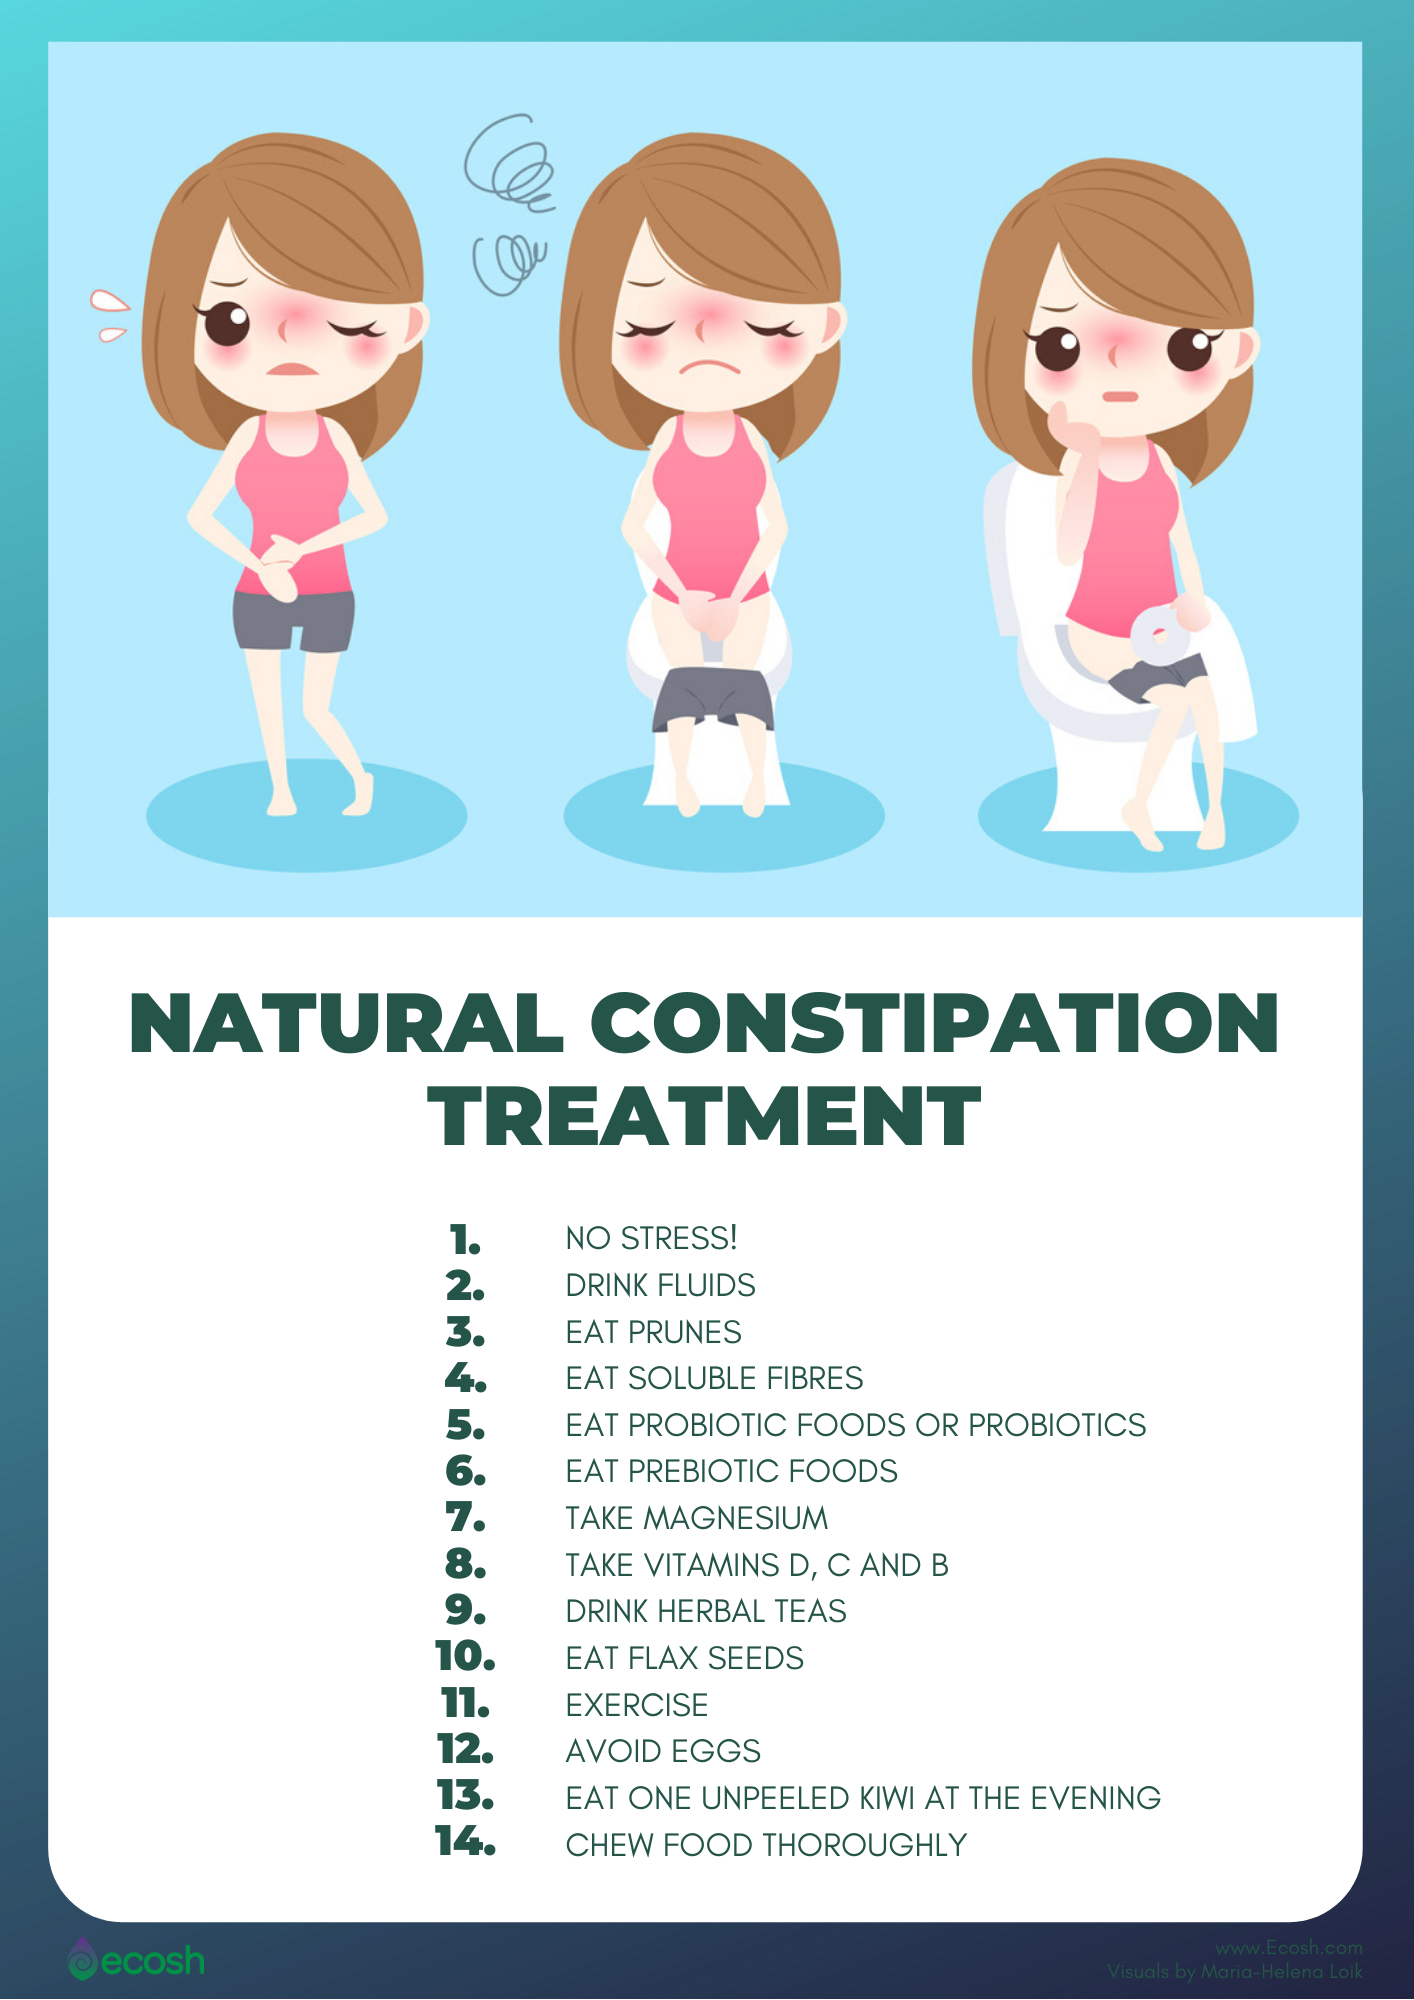 Natural constipation treatment